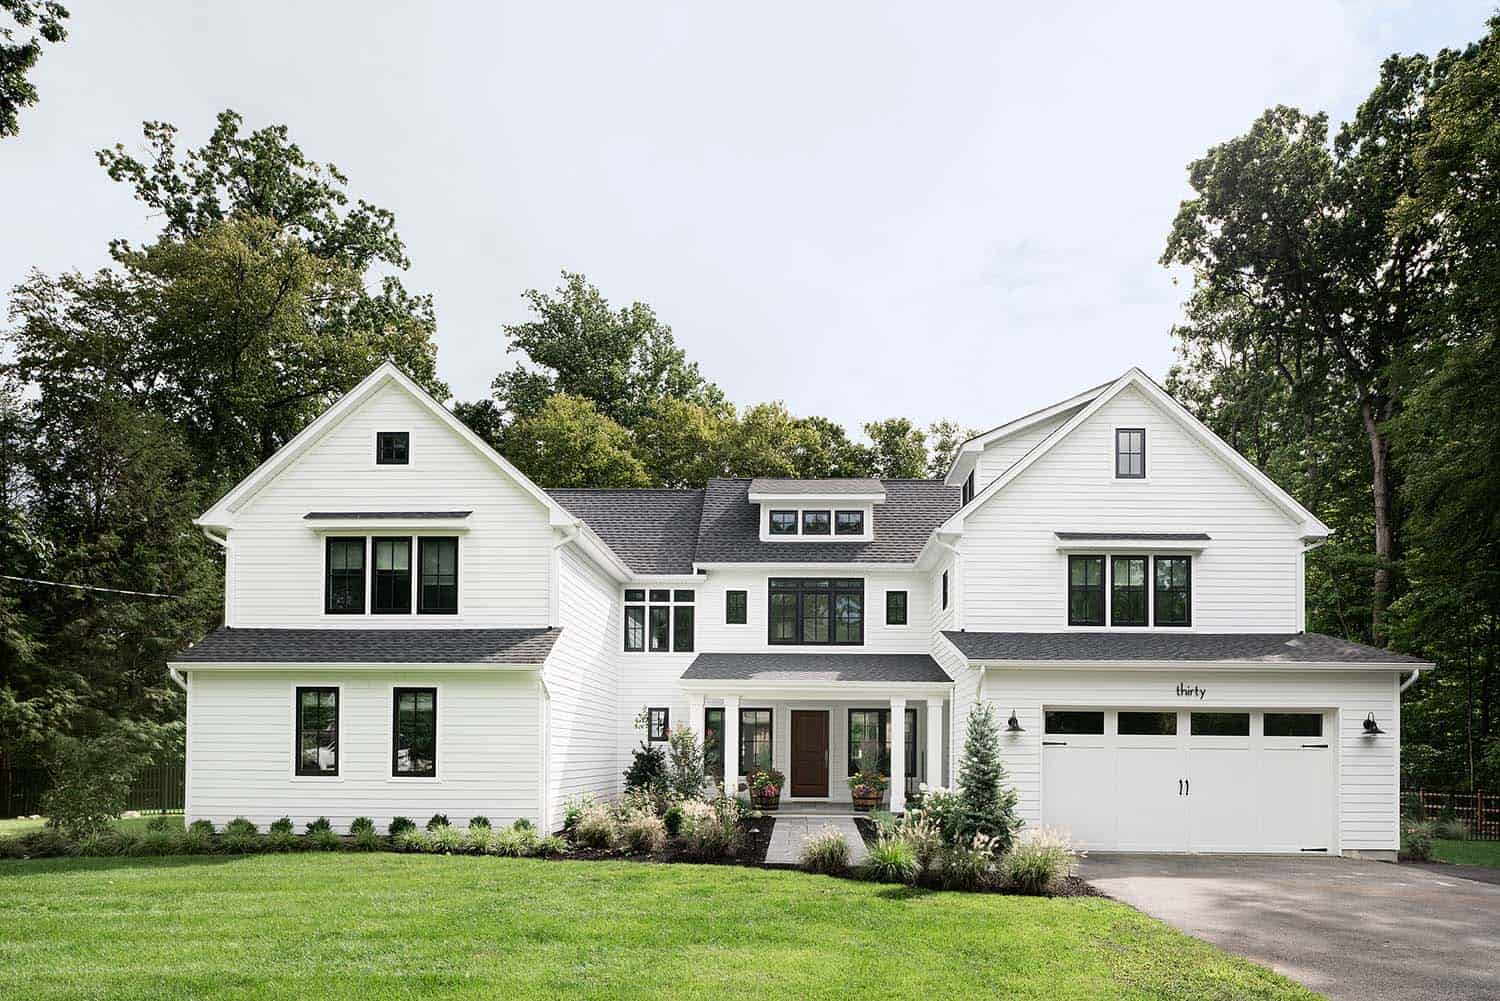 Bright and airy contemporary farmhouse style surrounded by ...